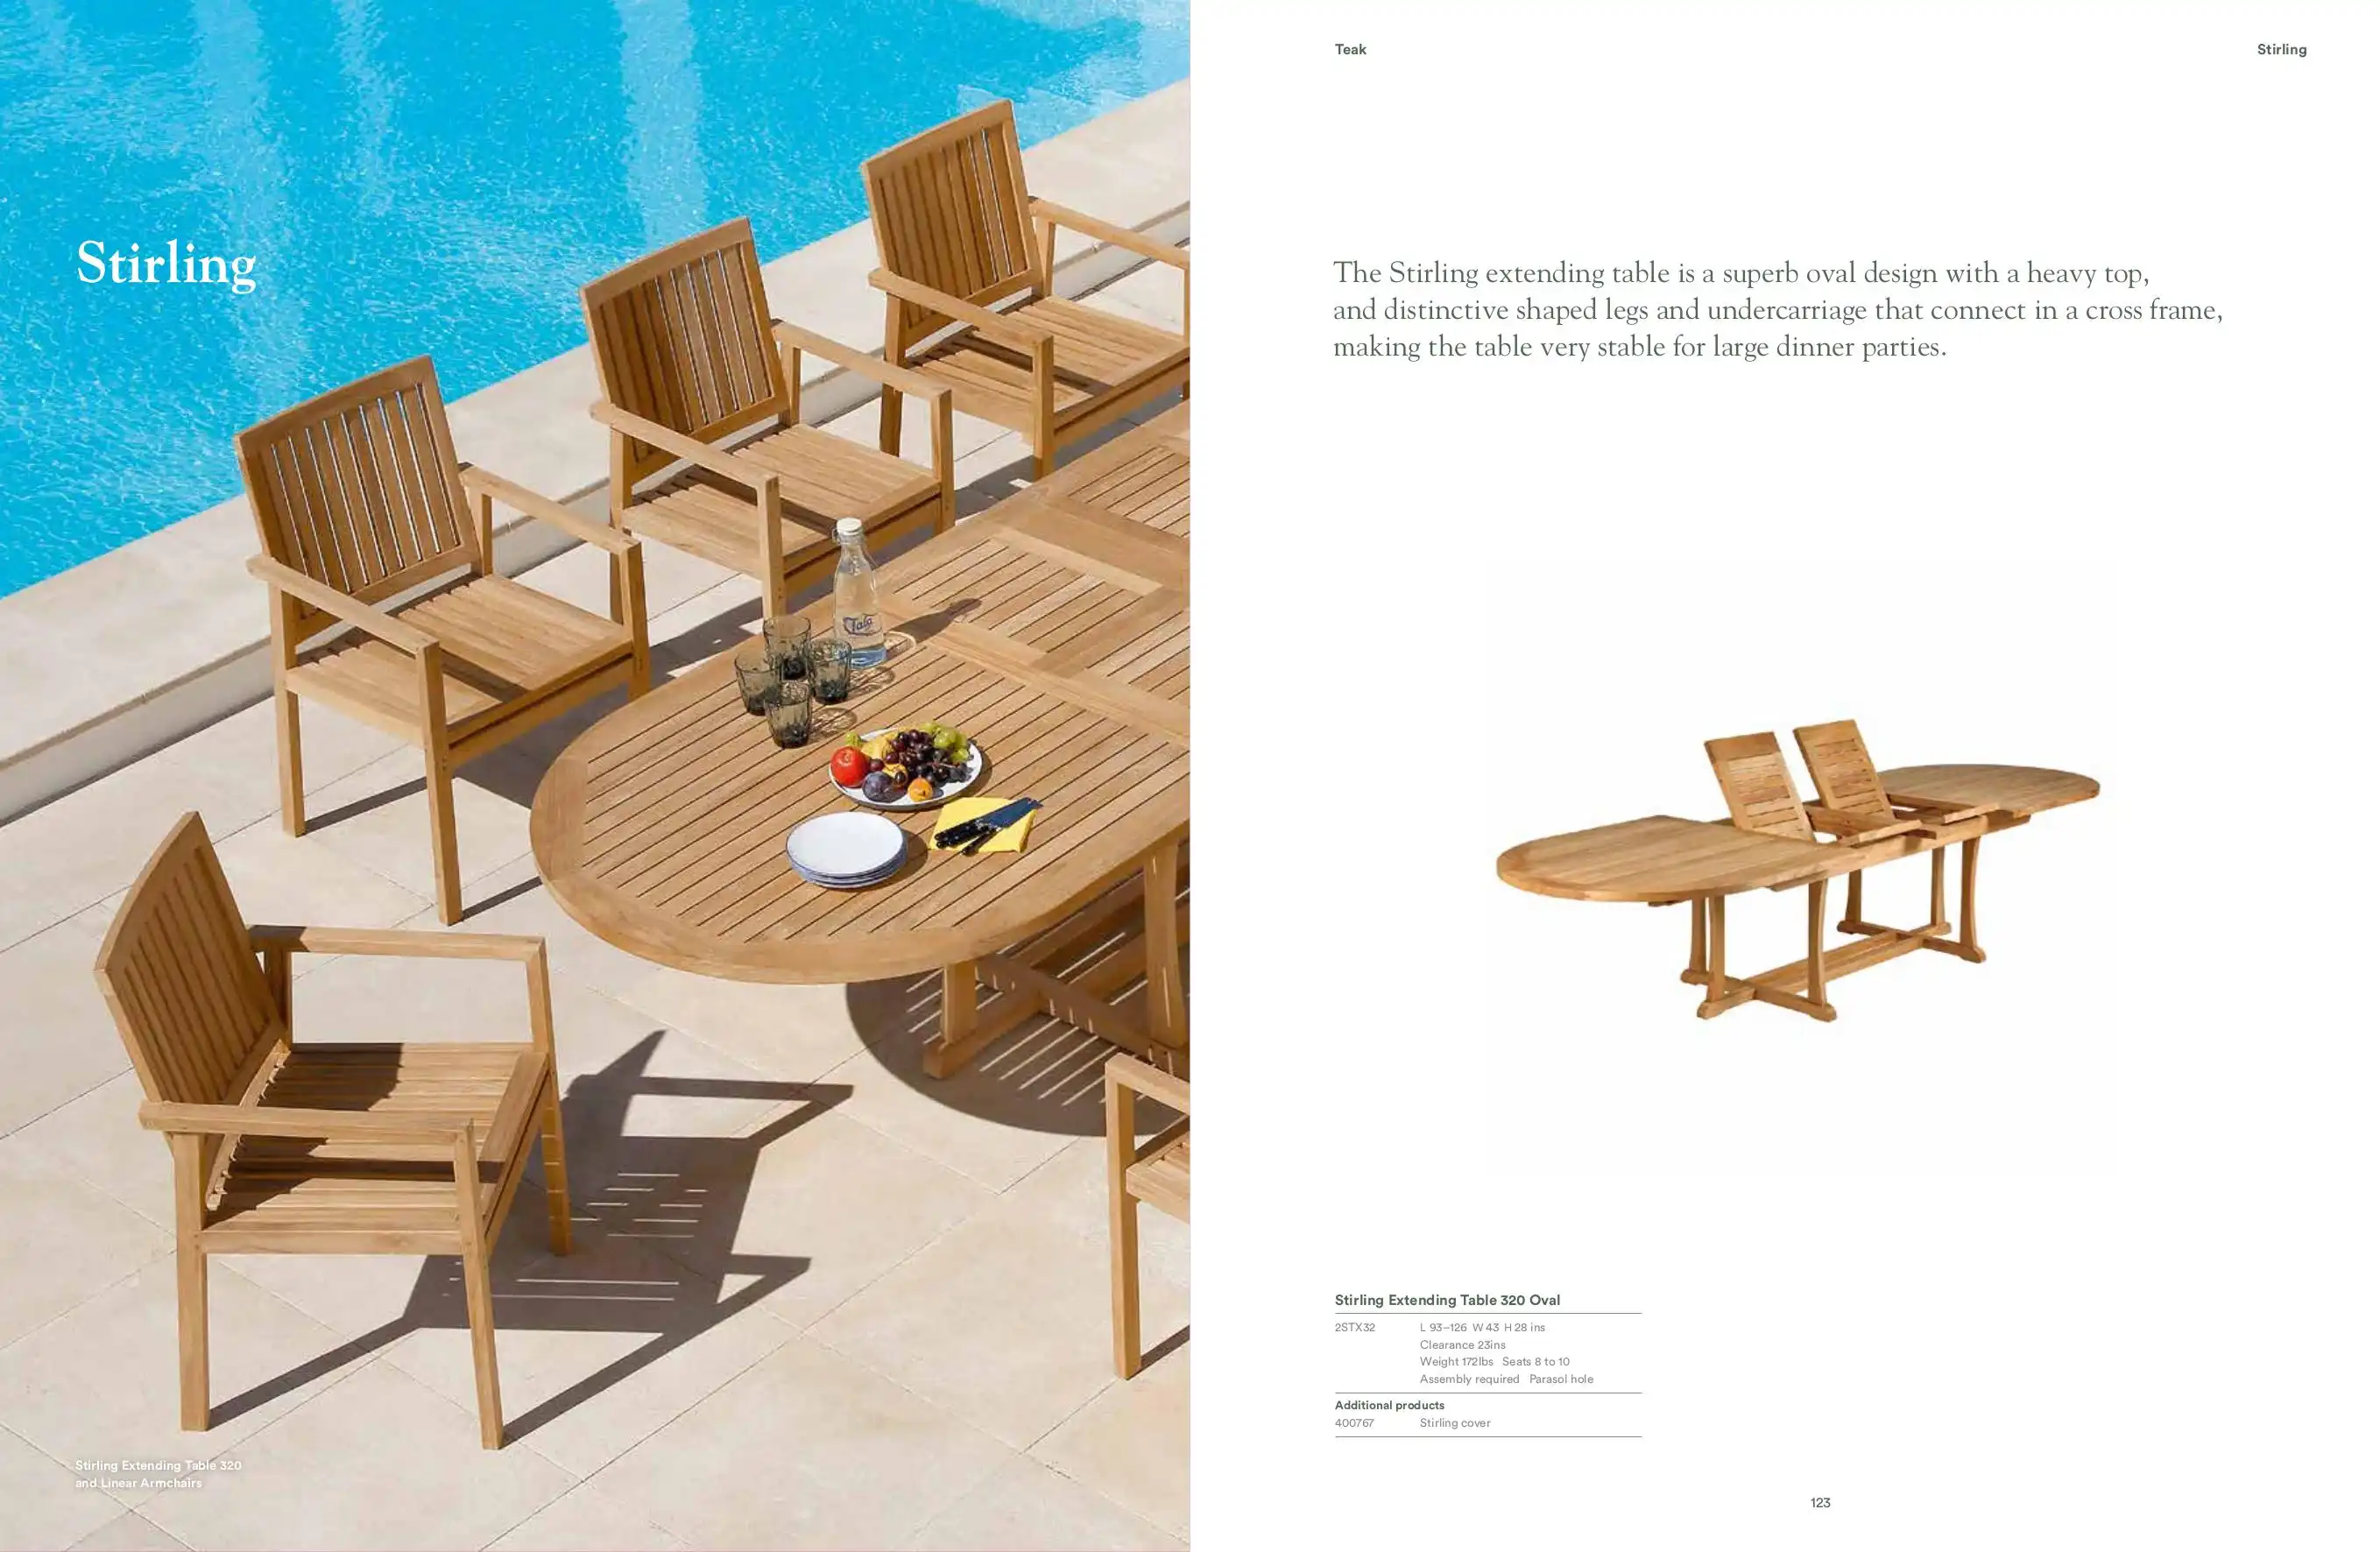 STIRLING (Teak) Dining Extension Table & Chairs by Barlow Tyrie